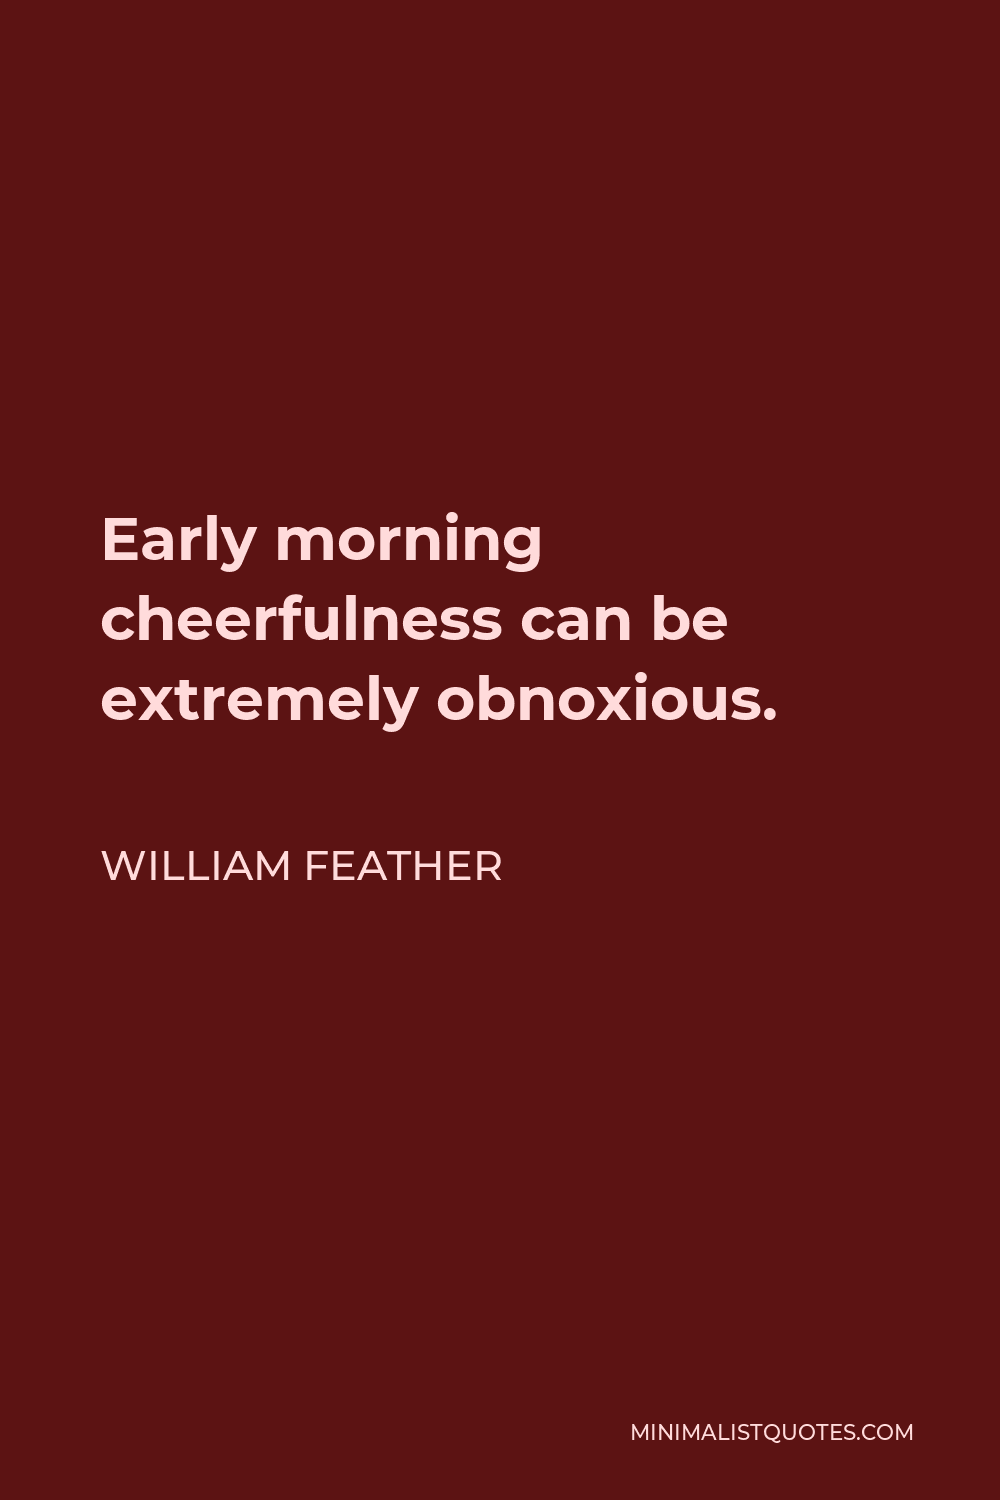 William Feather Quote - Early morning cheerfulness can be extremely obnoxious.